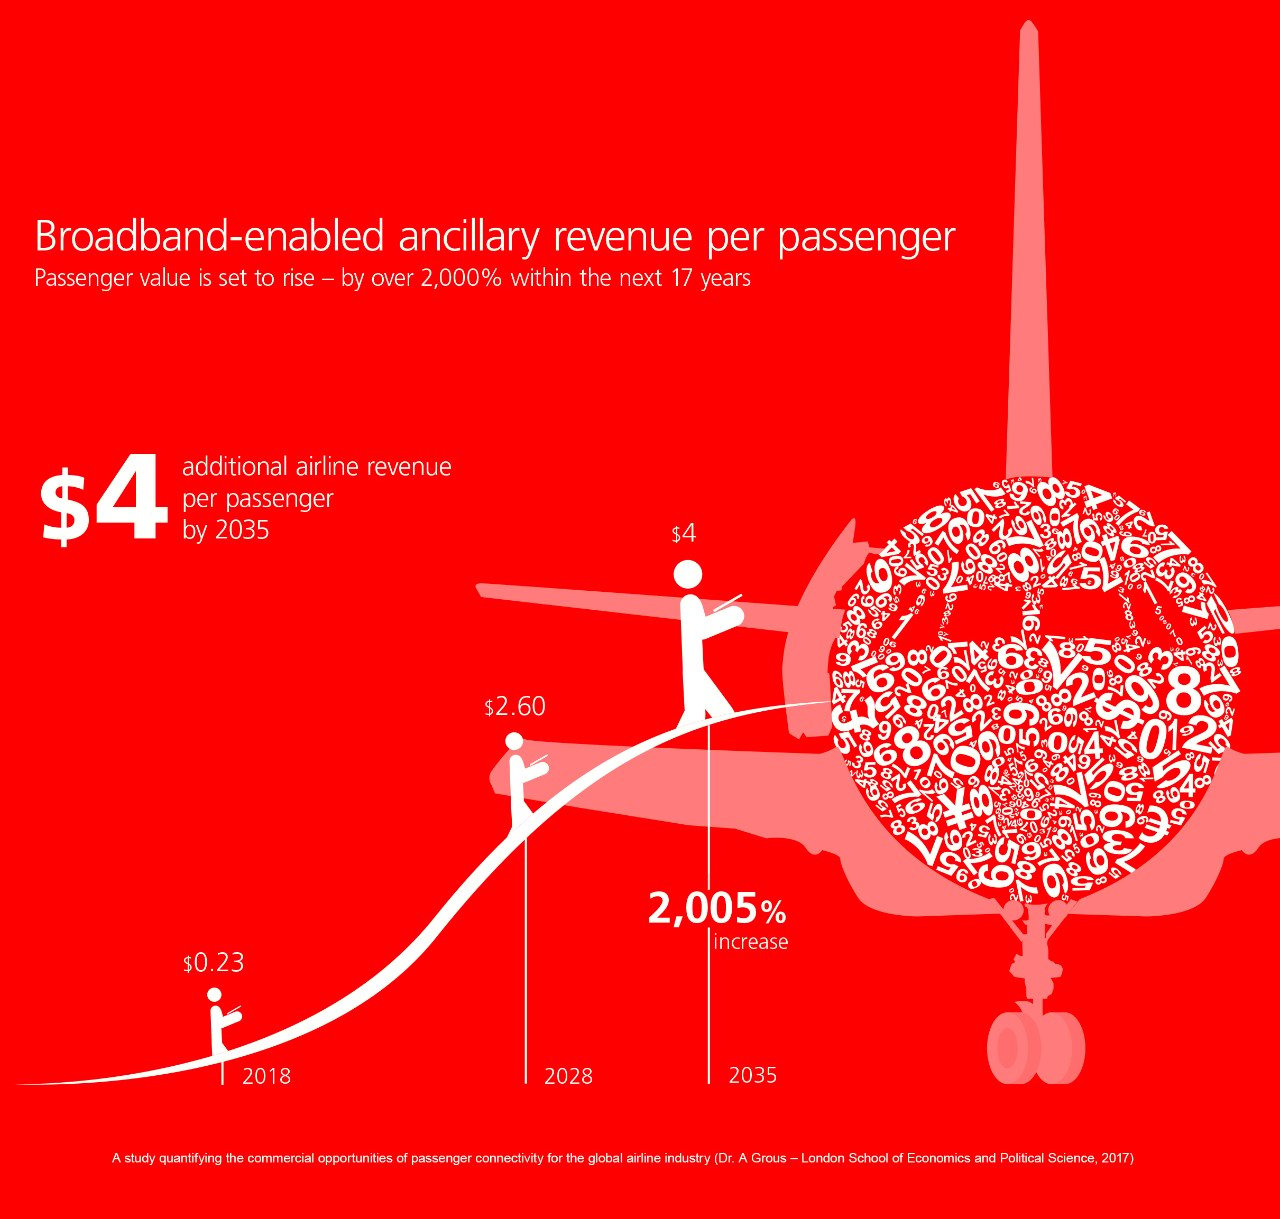 Infographic demonstrating the growth in ancillary revenue per passenger from connectivity